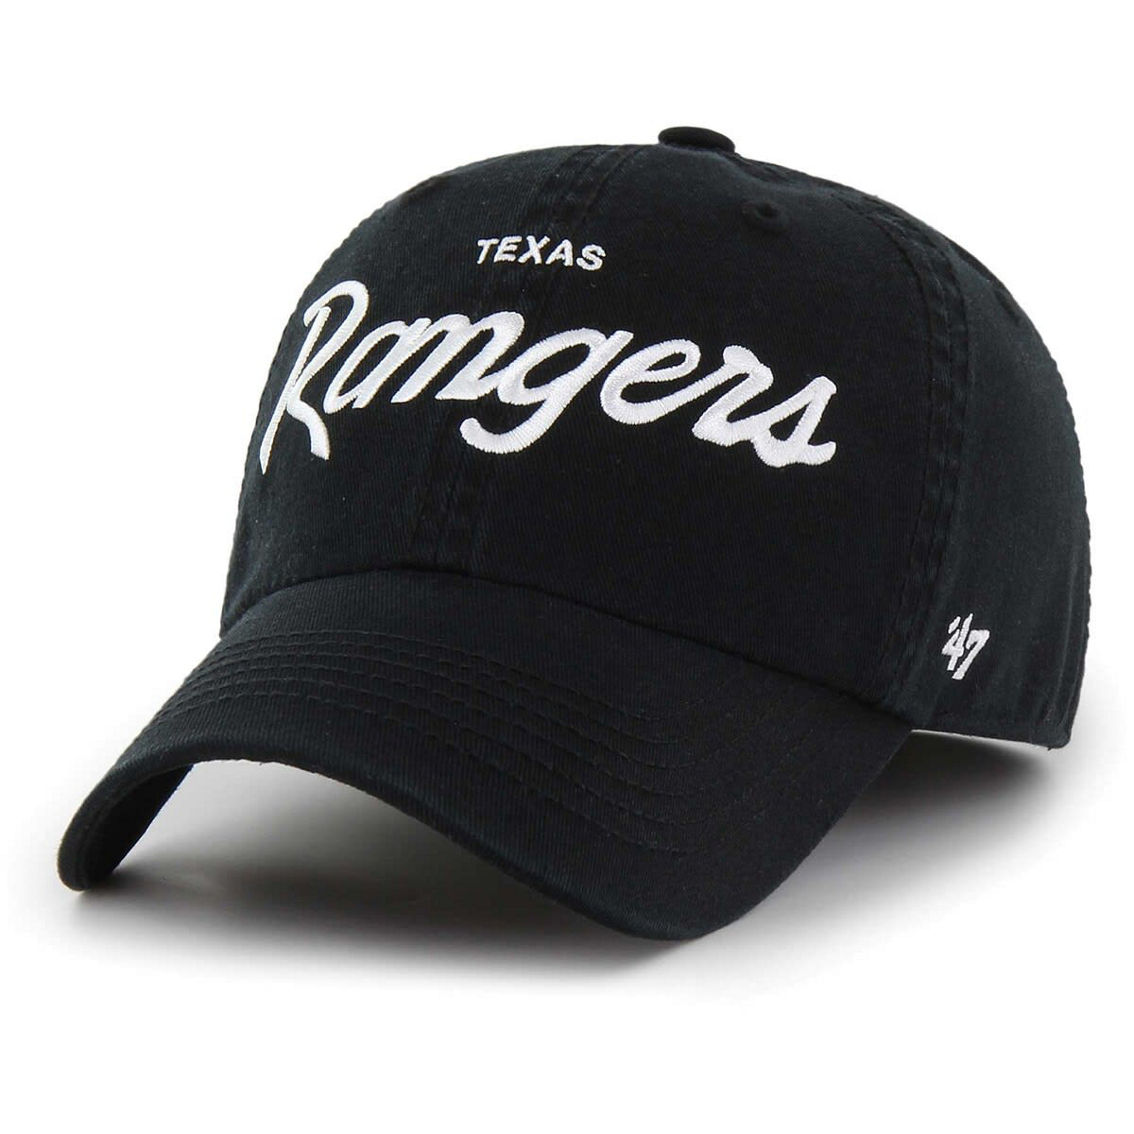 '47 Men's Black Texas Rangers Crosstown Classic Franchise Fitted Hat - Image 2 of 3